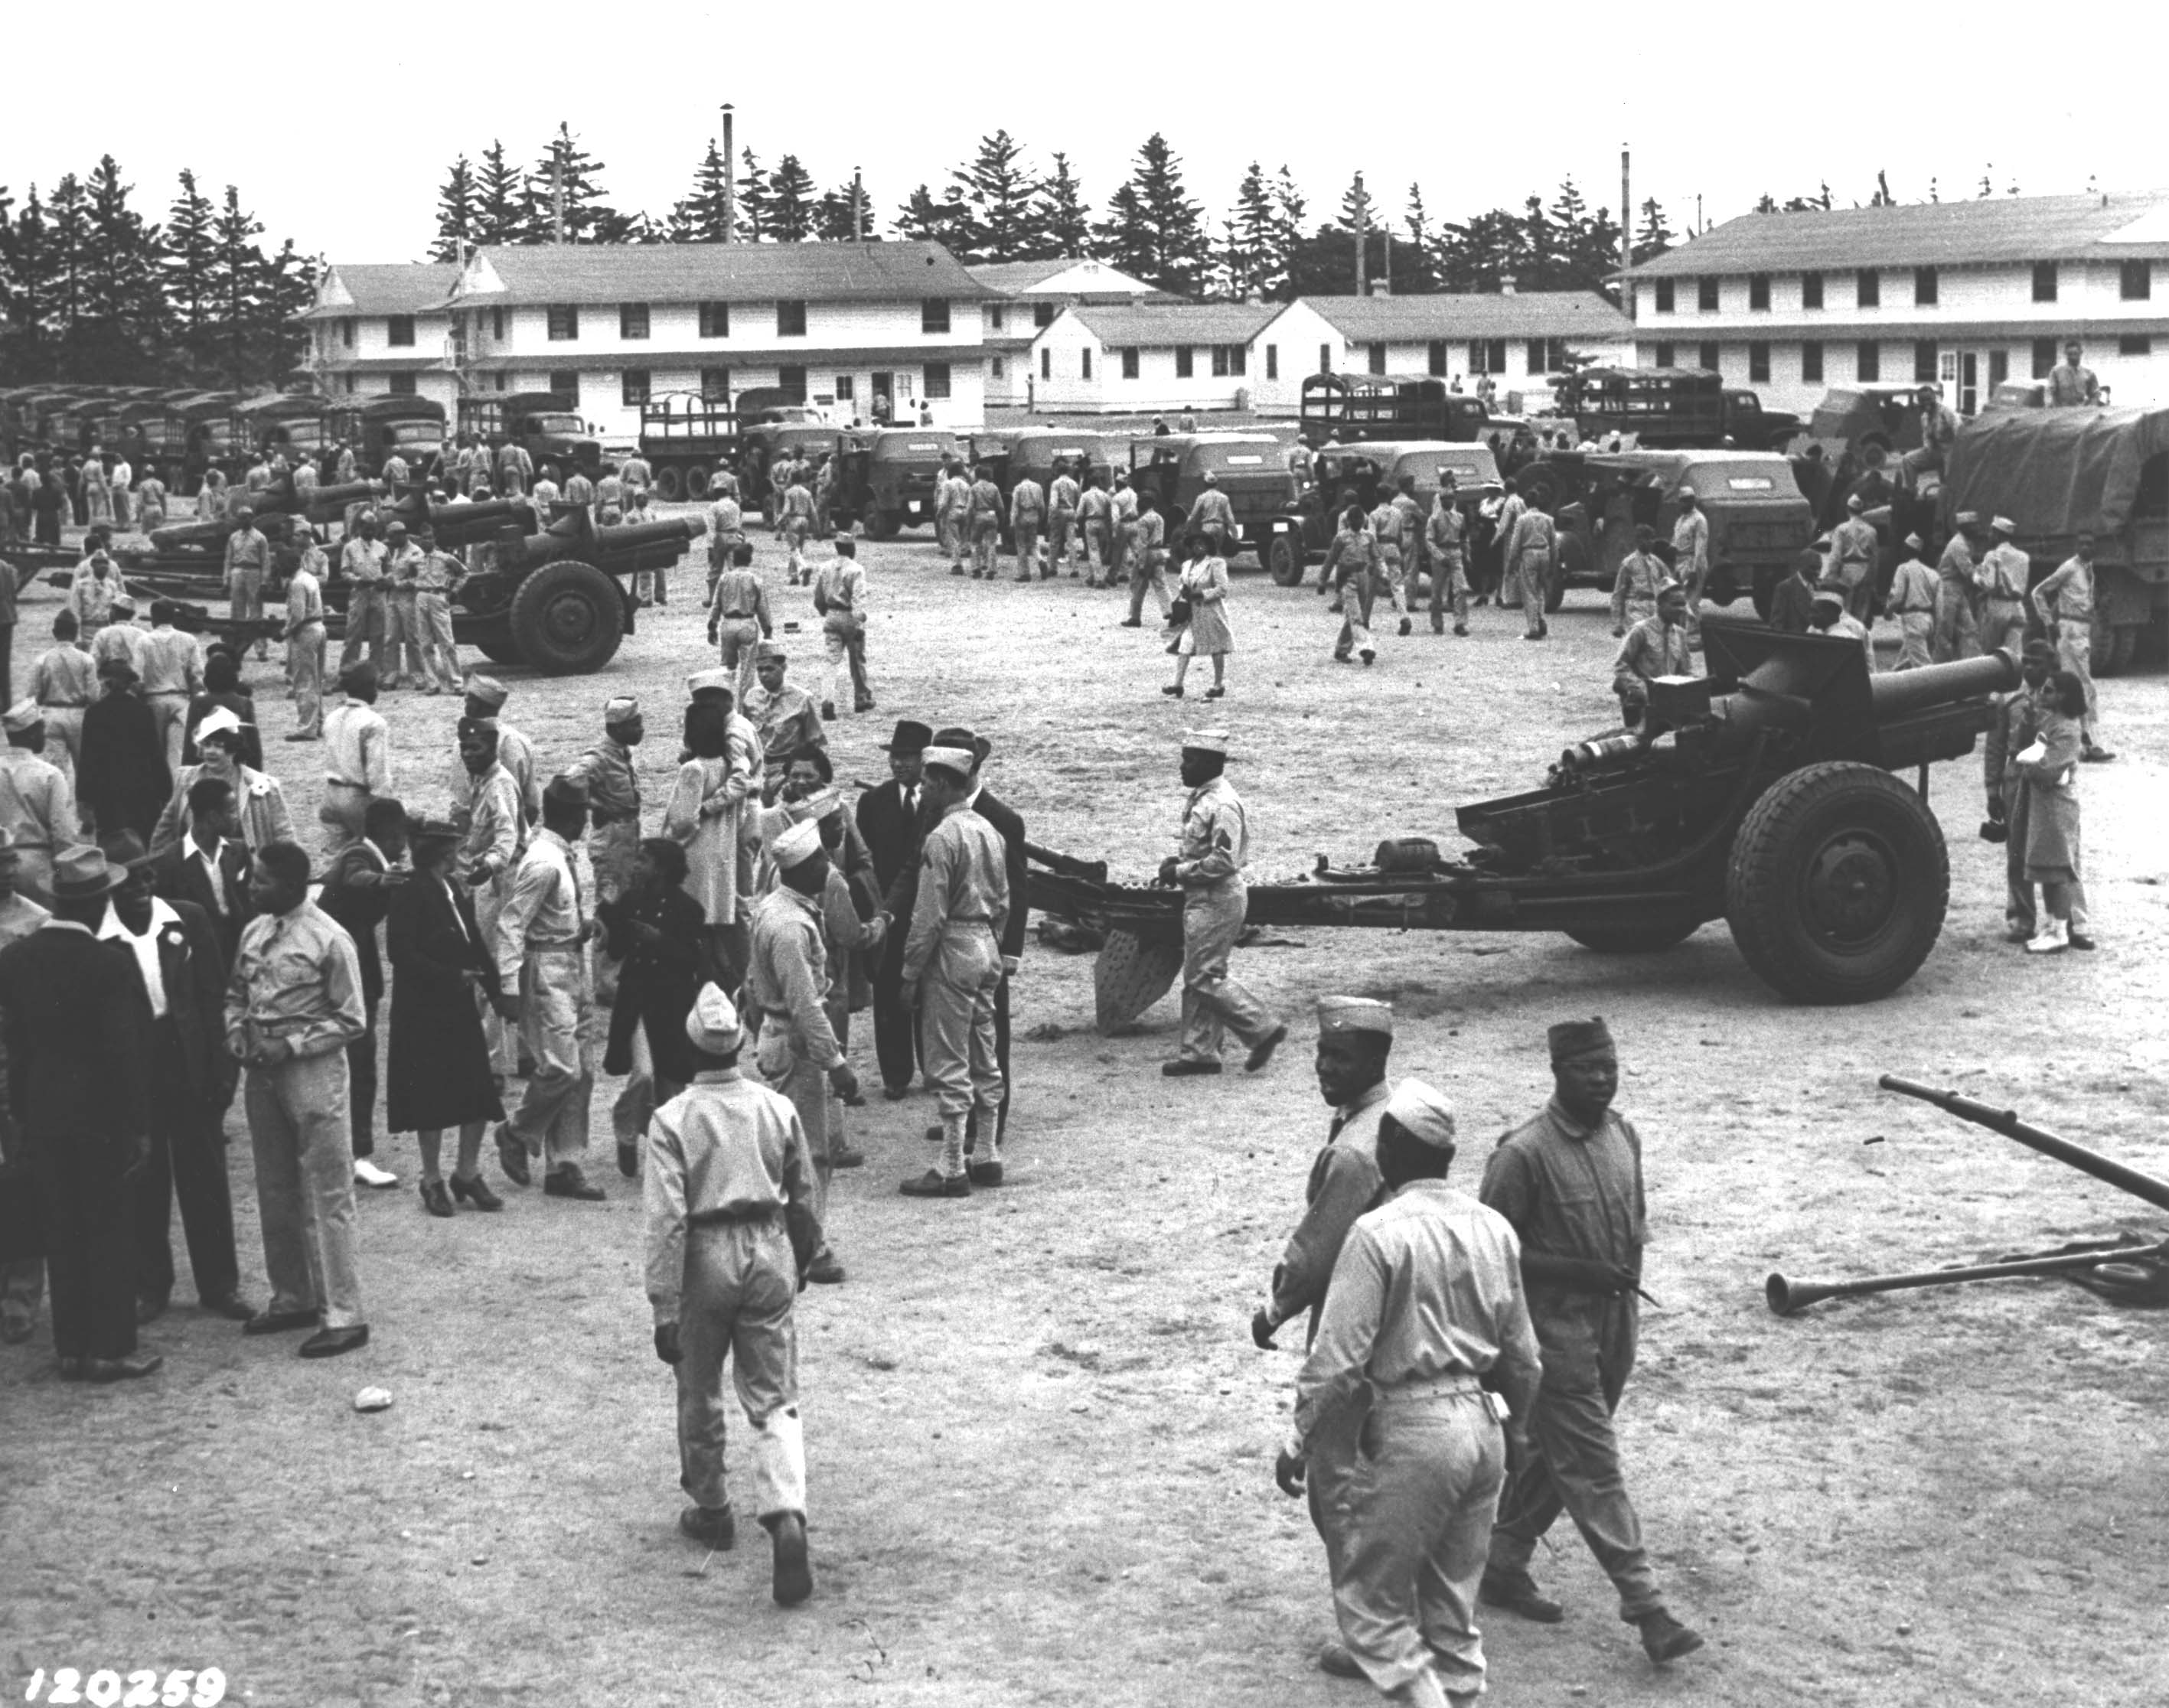 155 mm Howitzer Carriage M1917 or M1918 howitzers on display, Fort Custer, Michigan, United States, Jun 1941